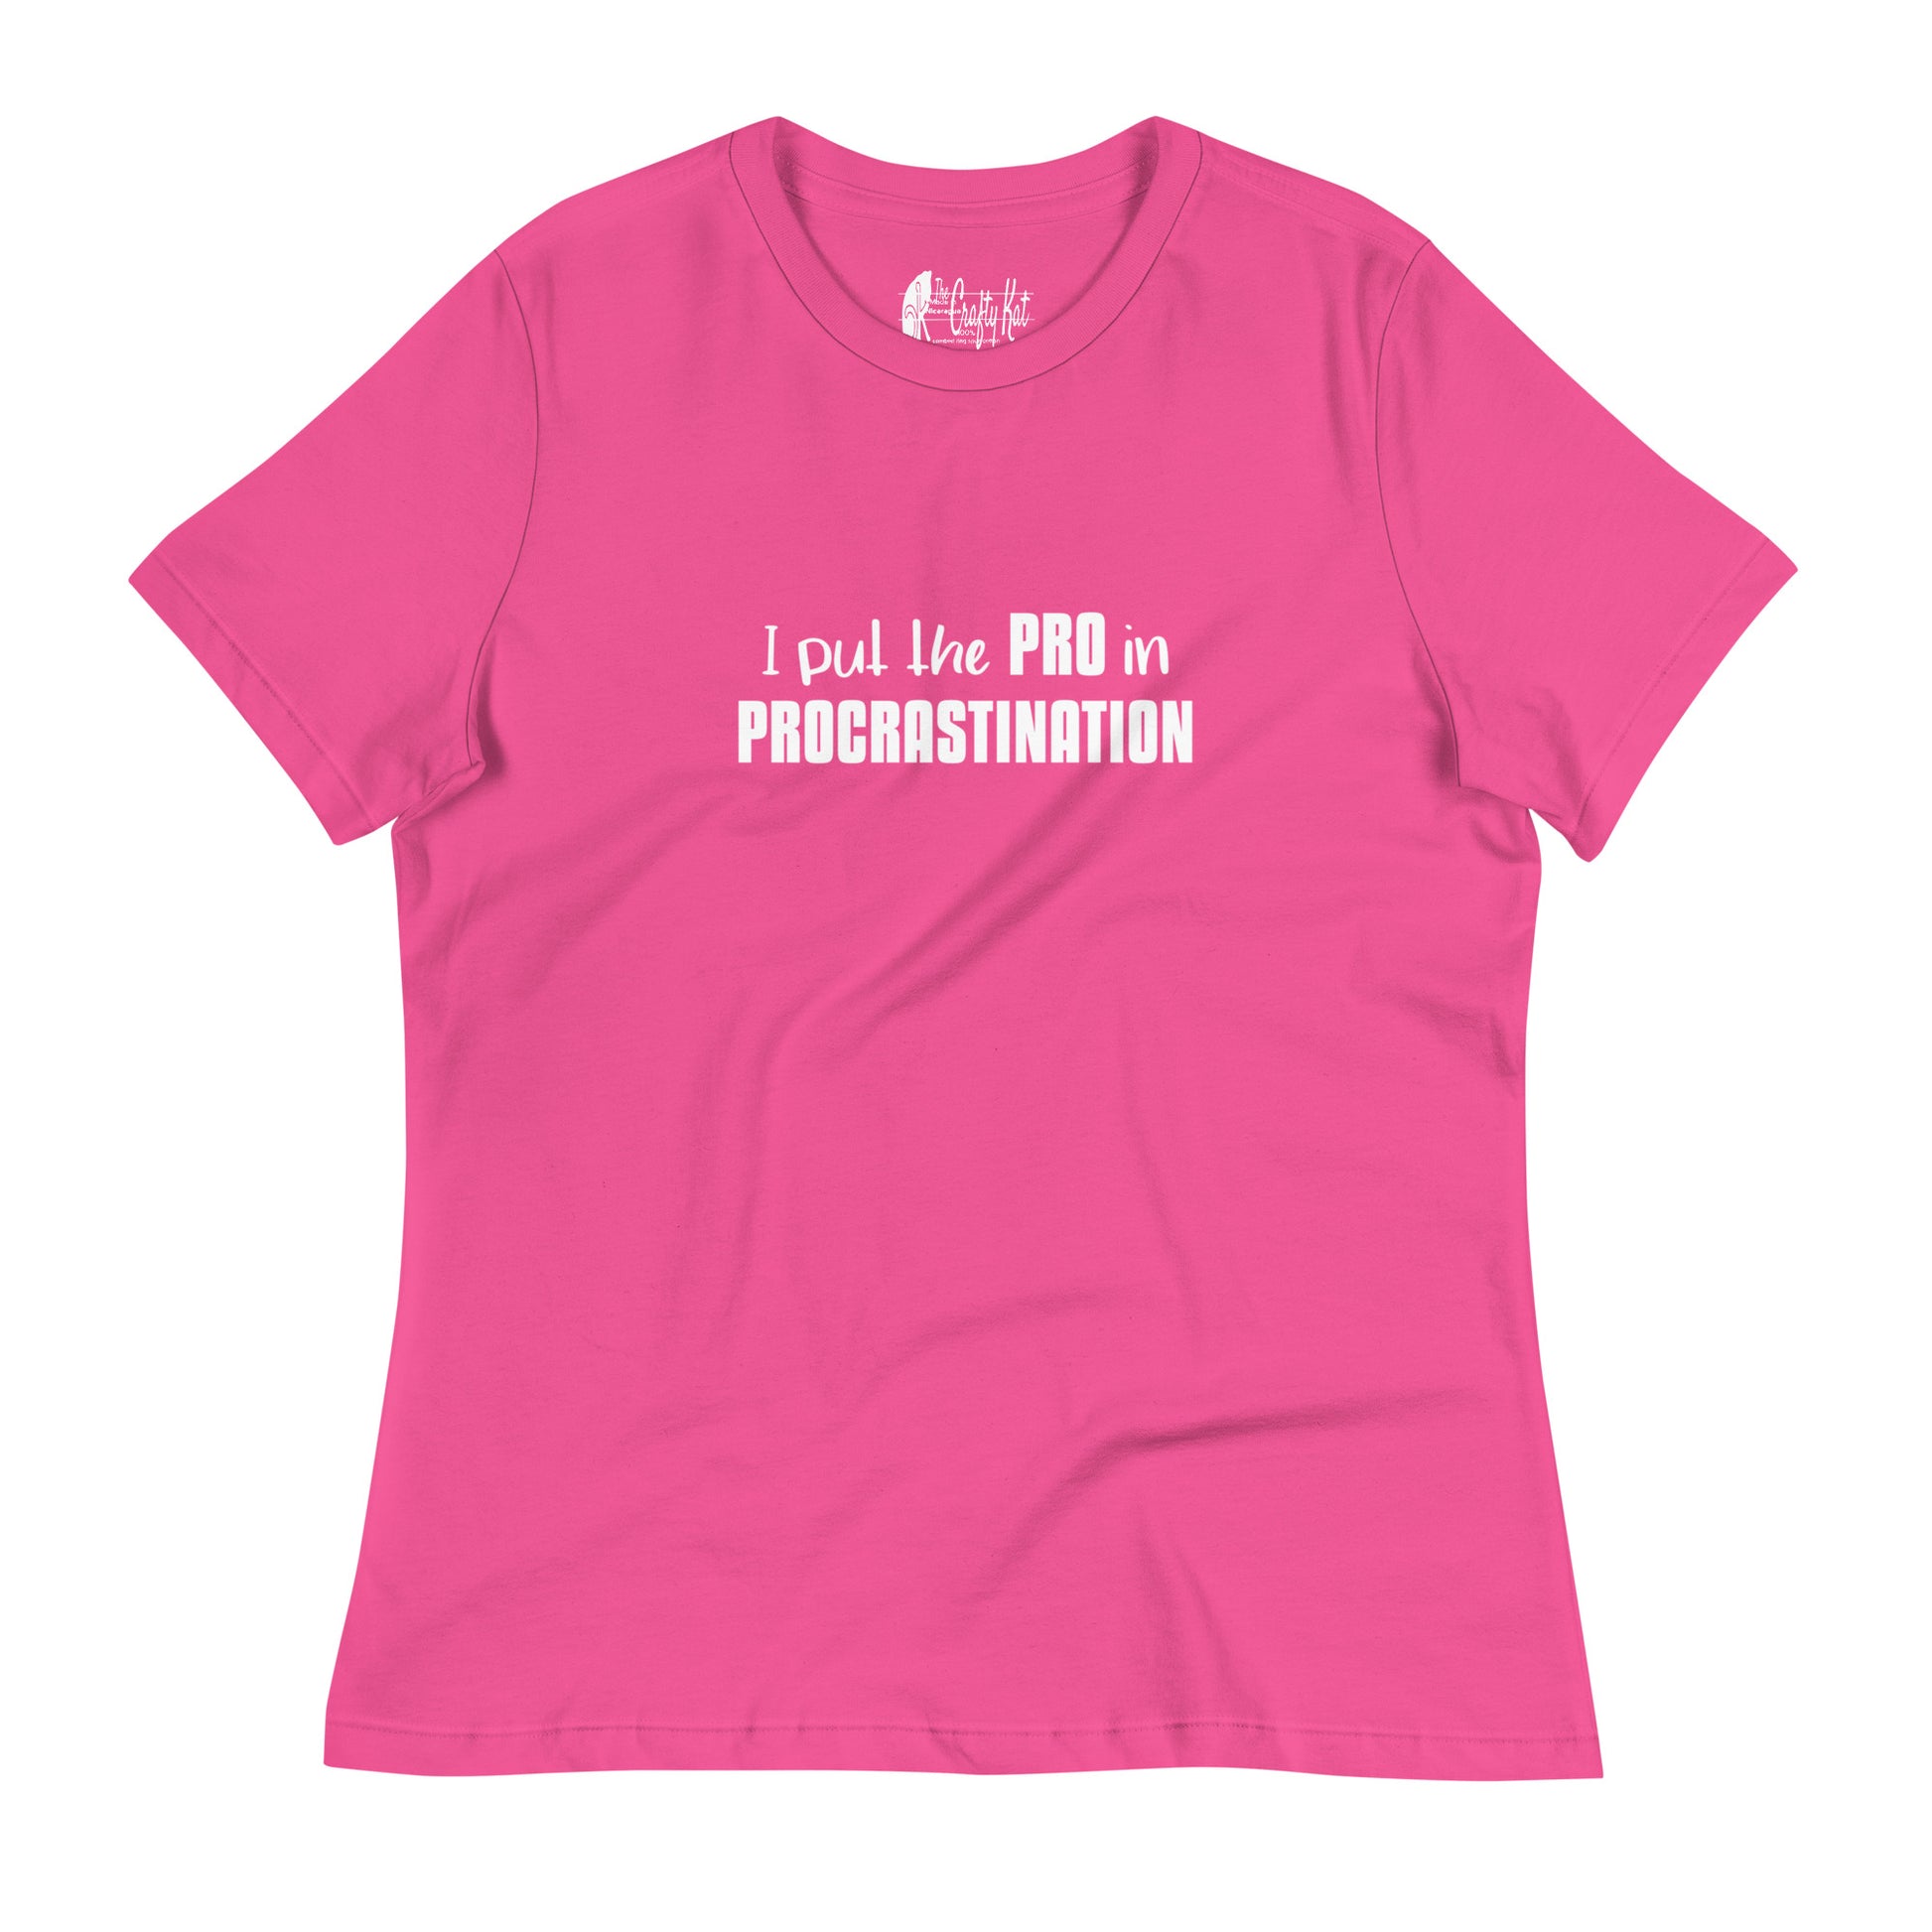 Berry (magenta) women's relaxed t-shirt with text graphic: "I put the PRO in PROCRASTINATION"